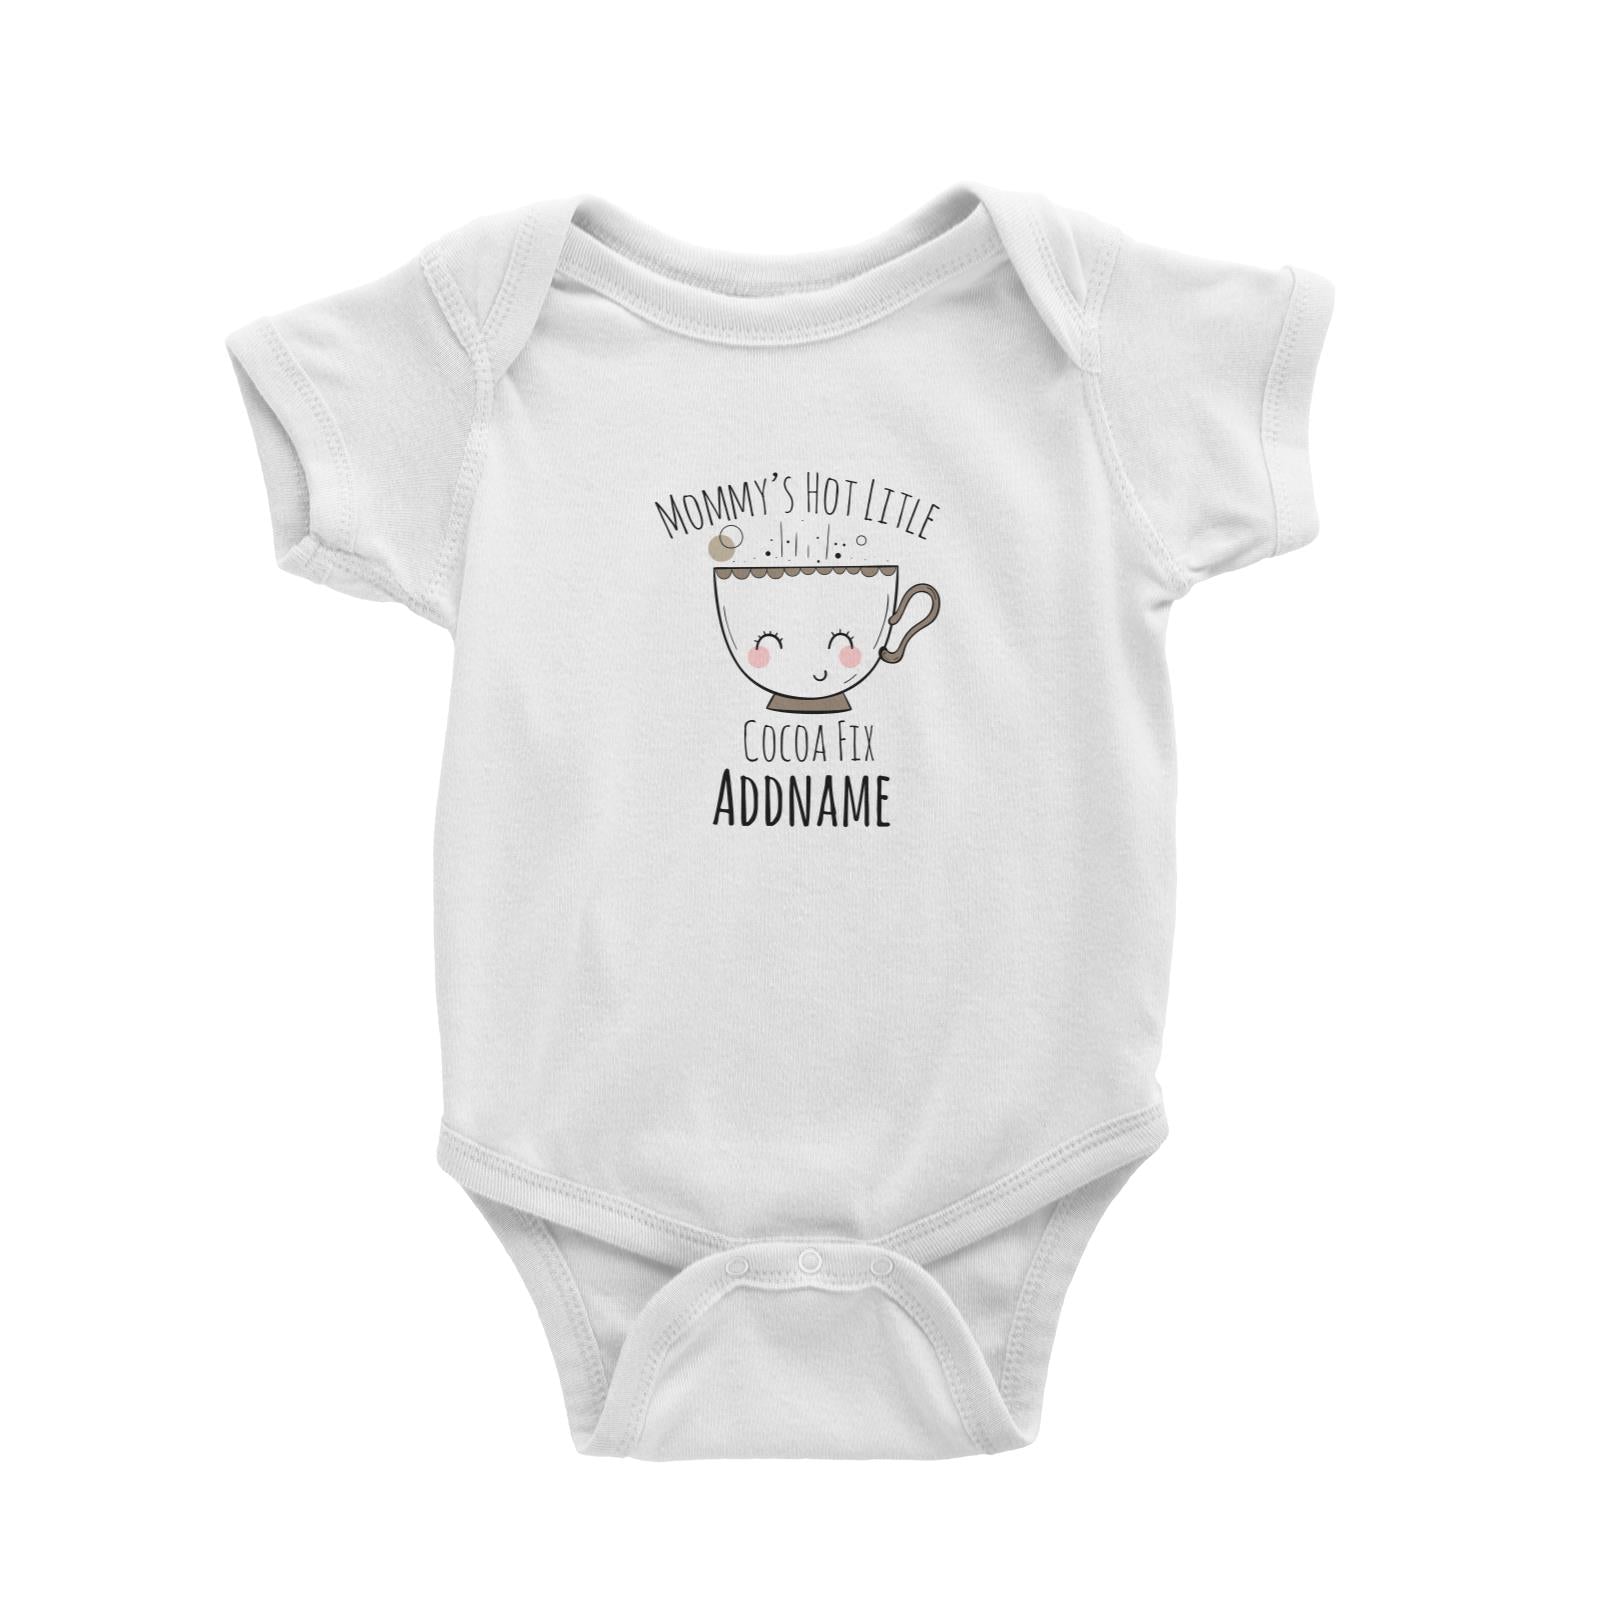 Drawn Sweet Snacks Mommy's Hot Little Cocoa Fix Addname Baby Romper